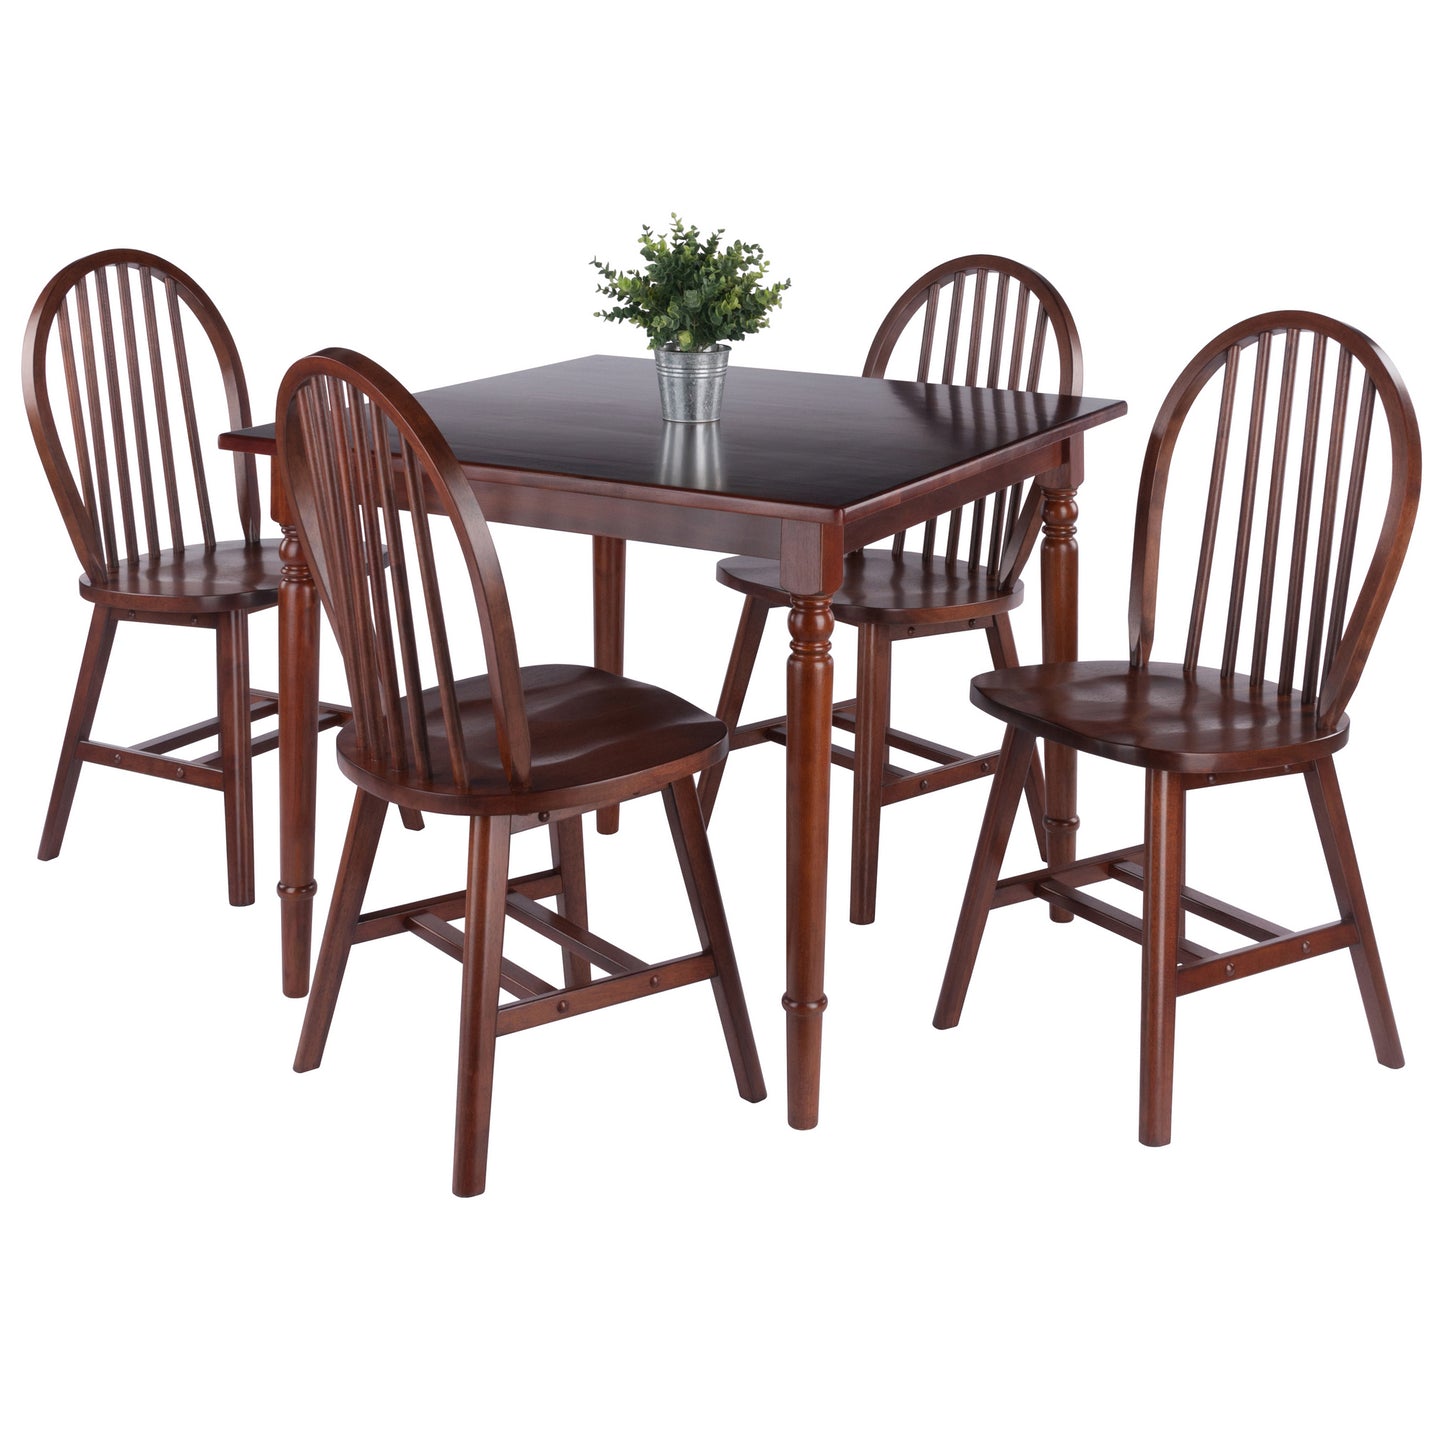 Mornay 5-Pc Dining Table with Windsor Chairs, Walnut